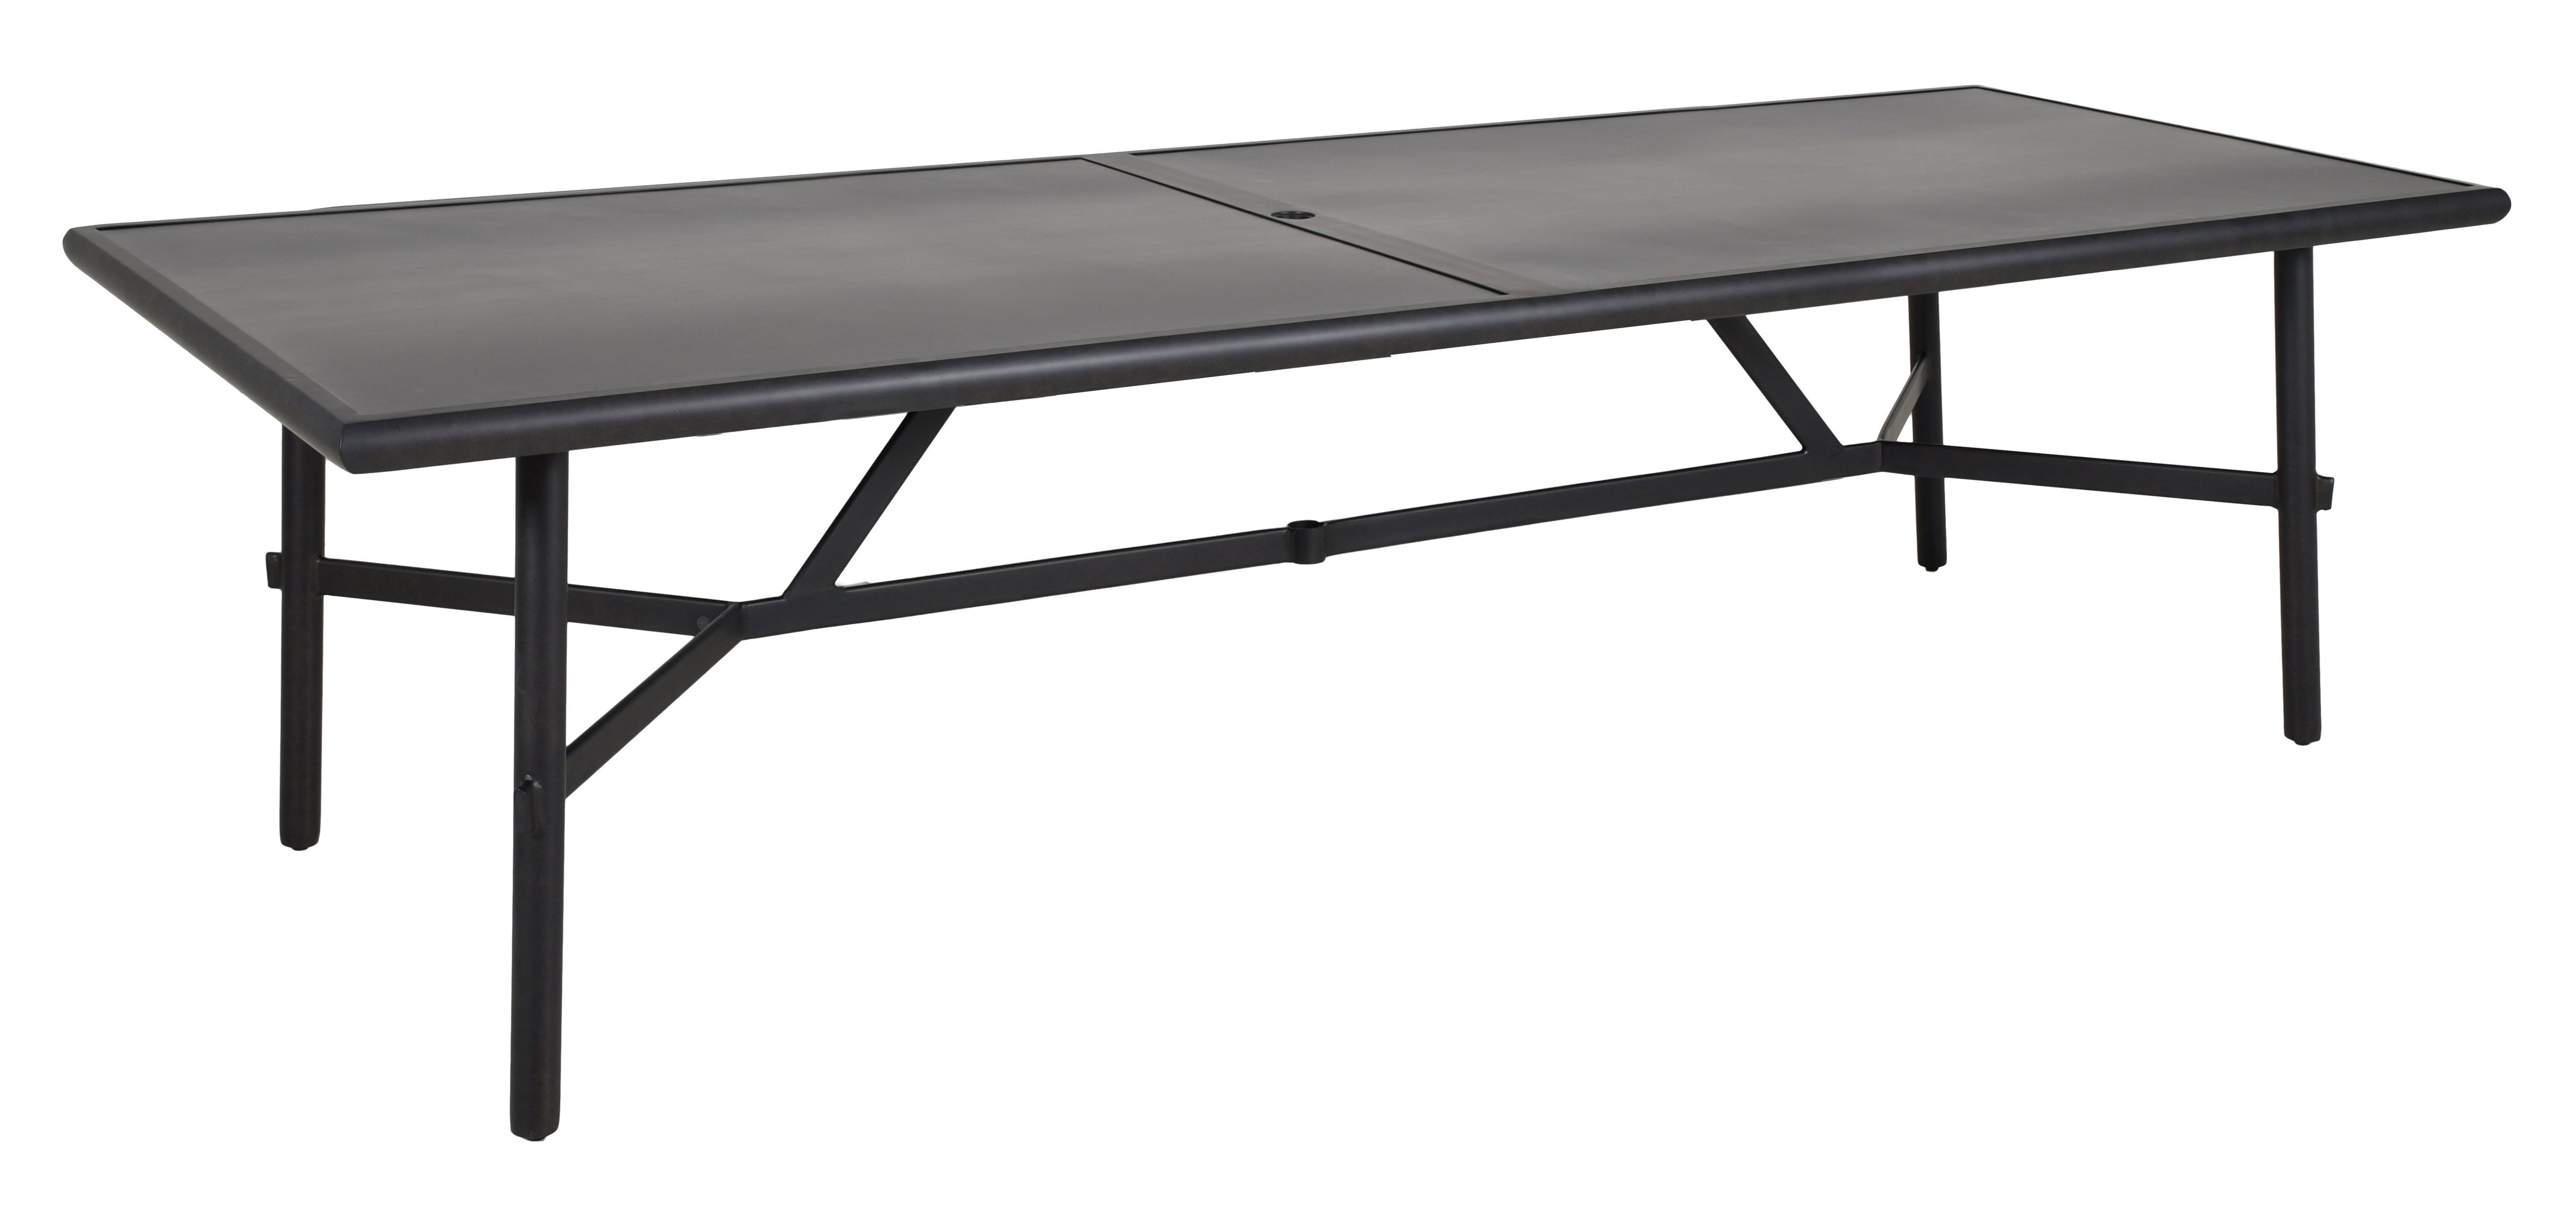 Barbados 44" x 116" Rectangular Dining Table  By Castelle